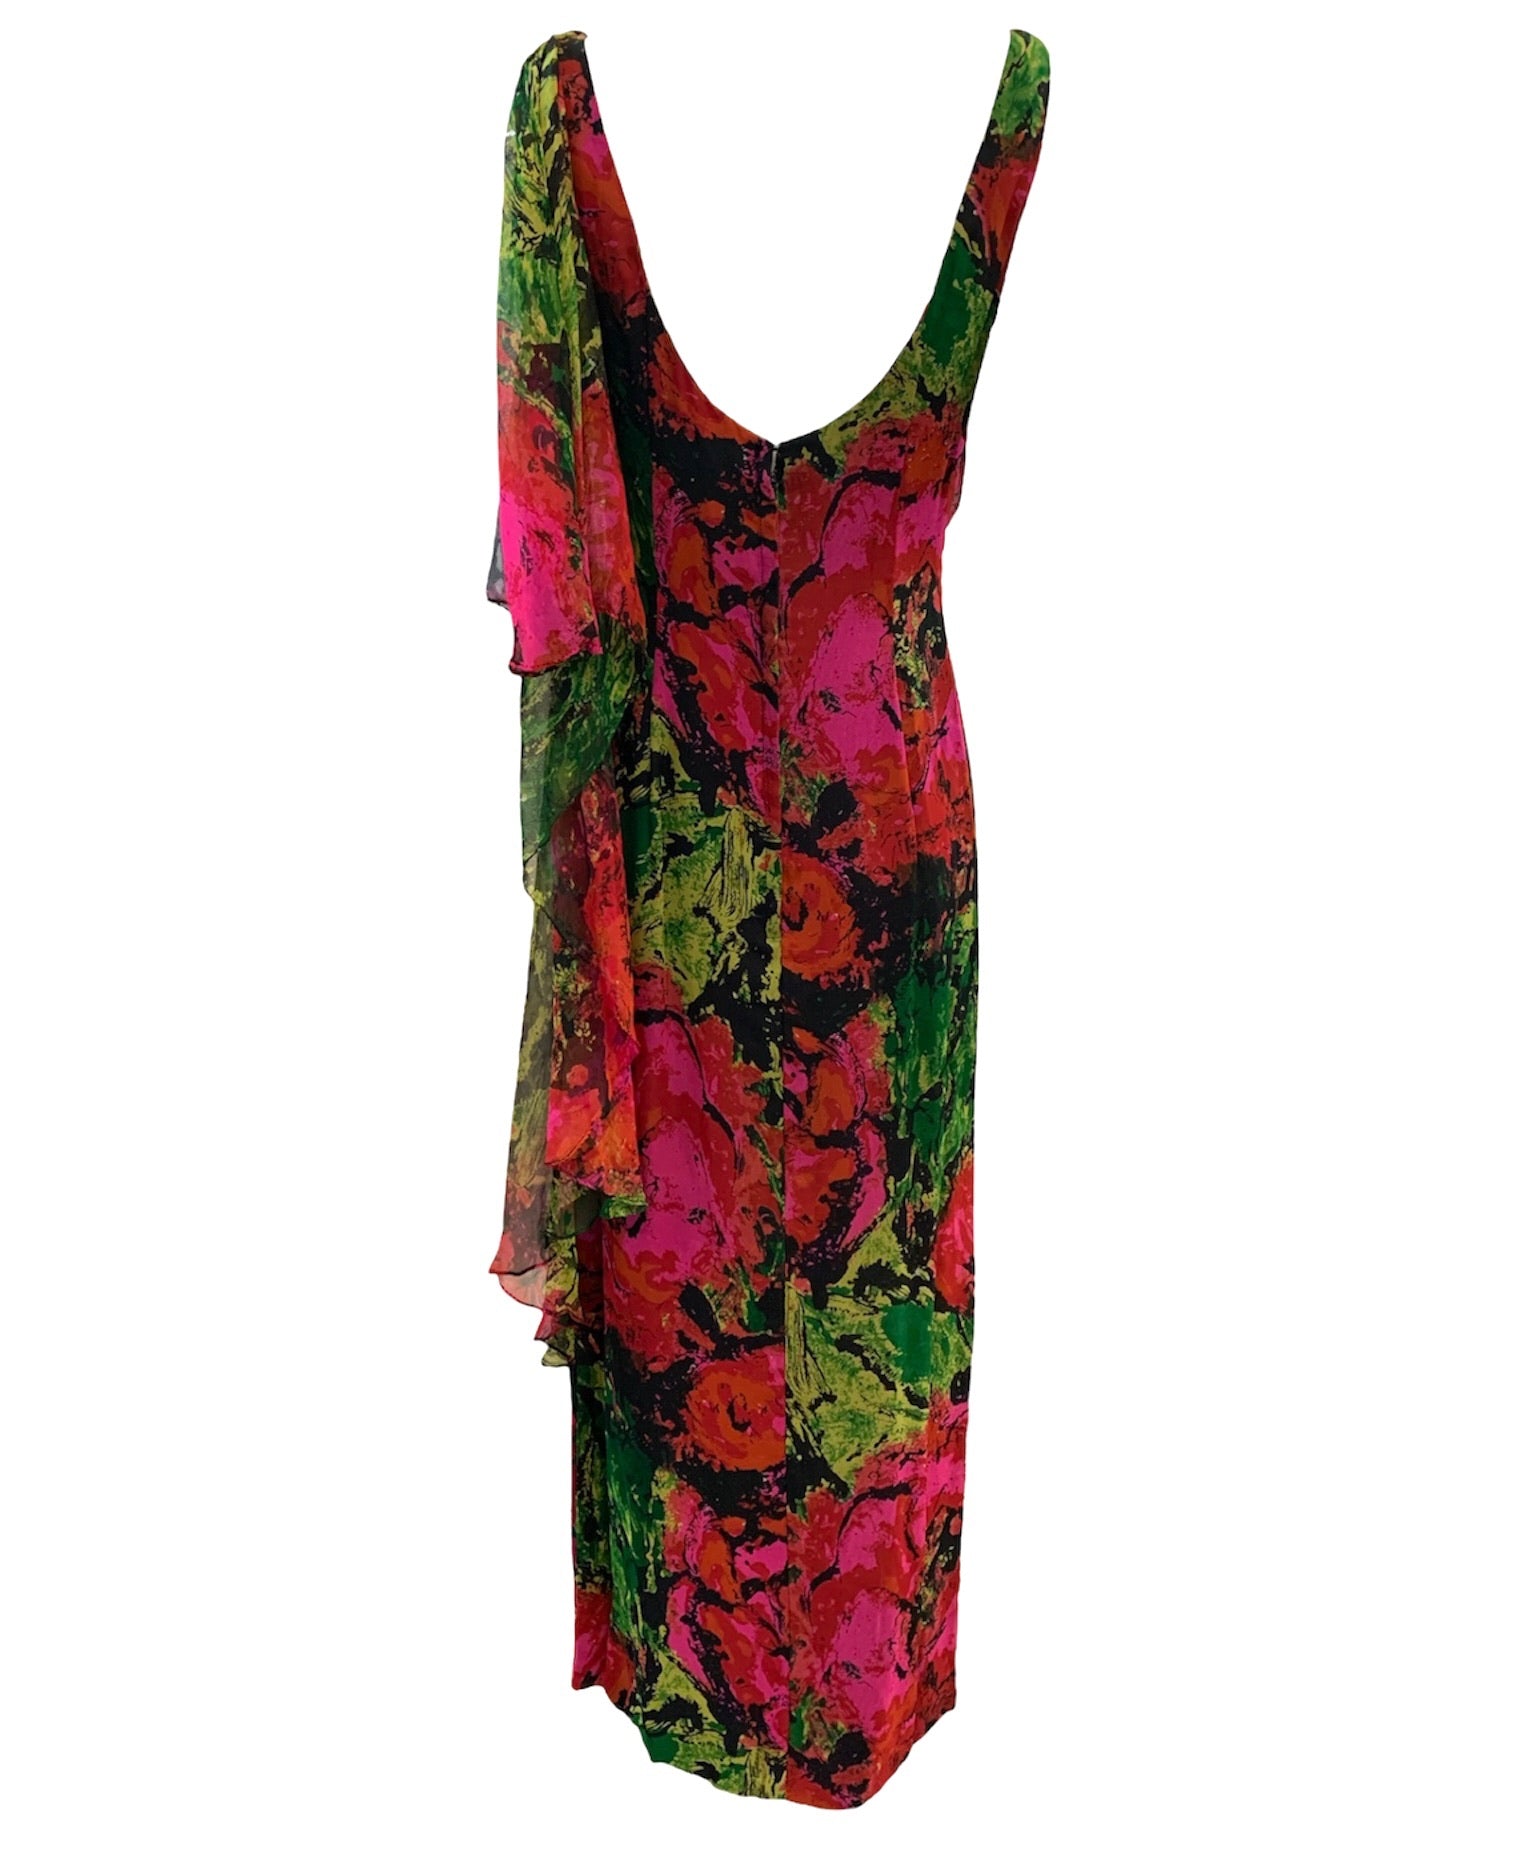 1960s Unlabeled Jewel Tone Floral Chiffon Sheath Gown BACK 3 of 5